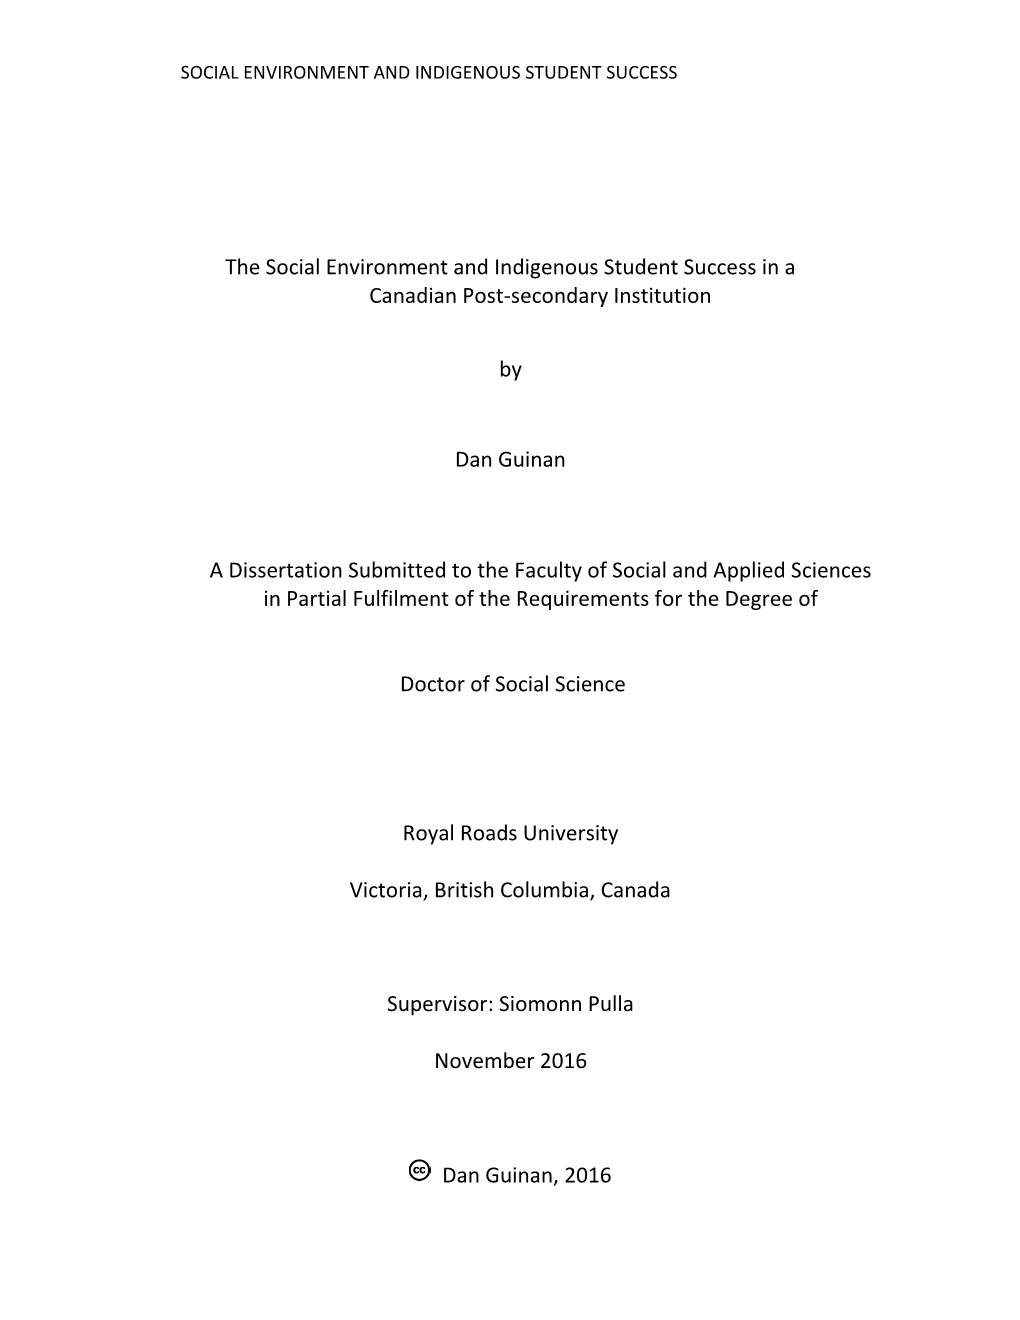 The Social Environment and Indigenous Student Success in a Canadian Post-Secondary Institution